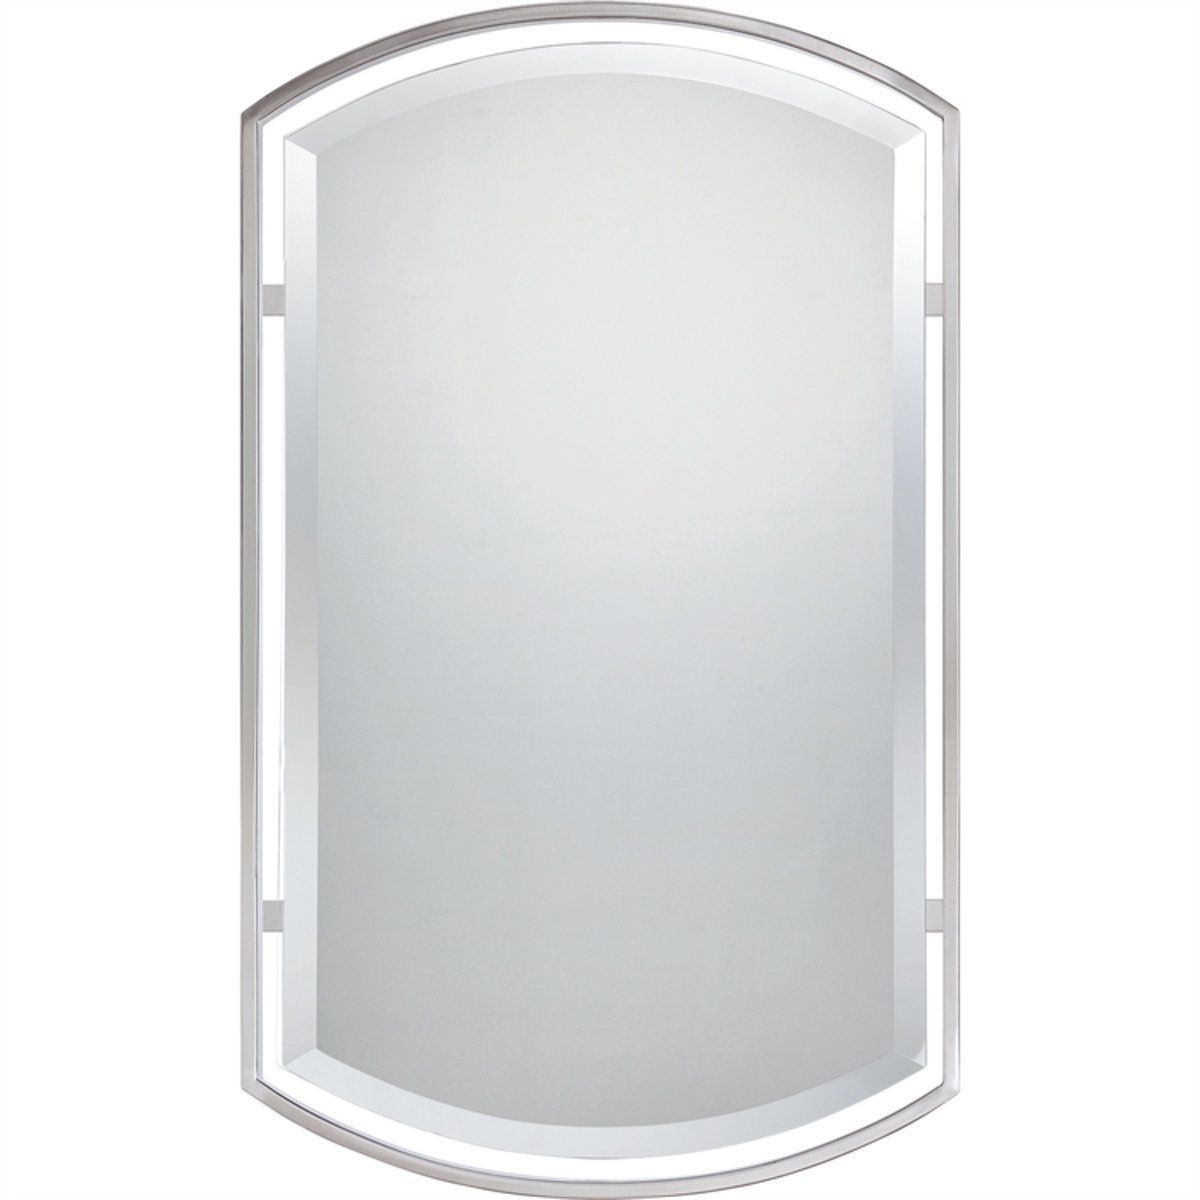 2020 Floating Frame Rounded Rectangular Mirror In  (View 6 of 15)